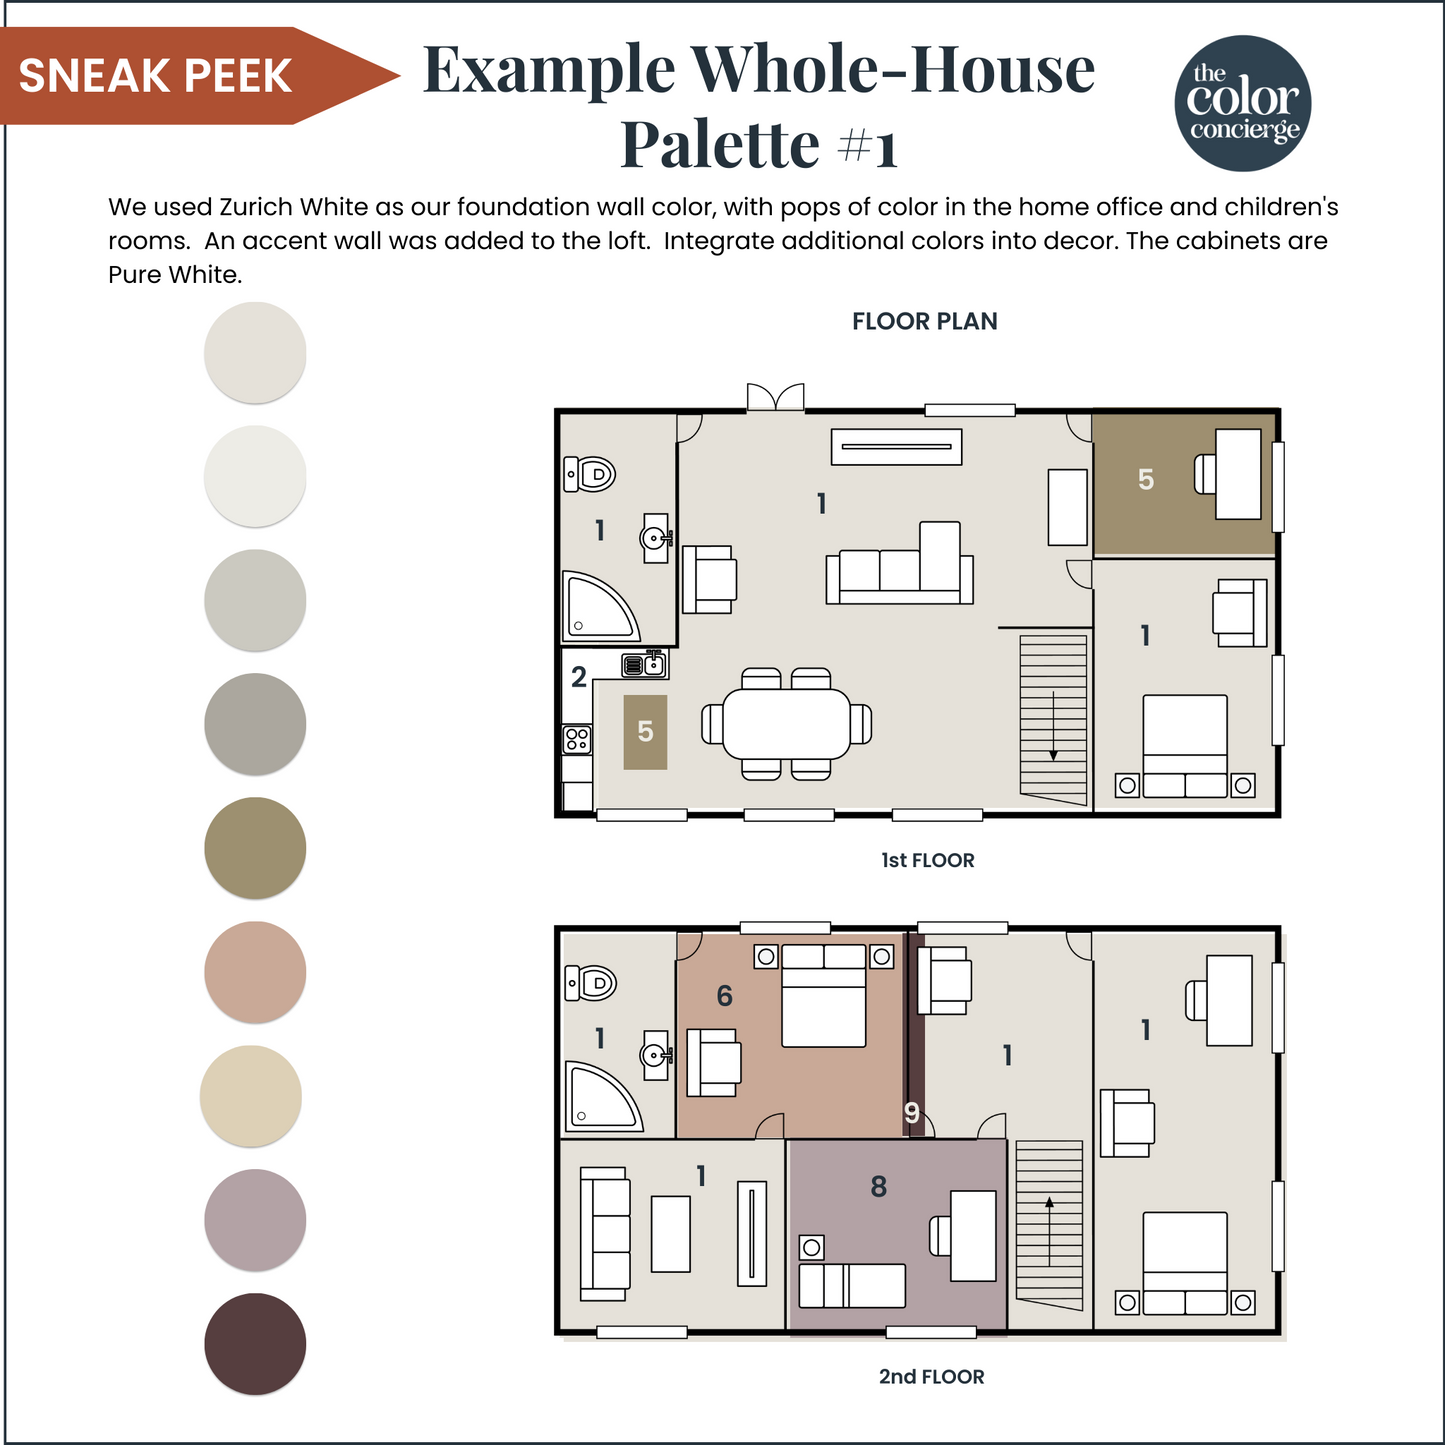 A Sherwin-Williams Zurich White whole house paint color palette mockup